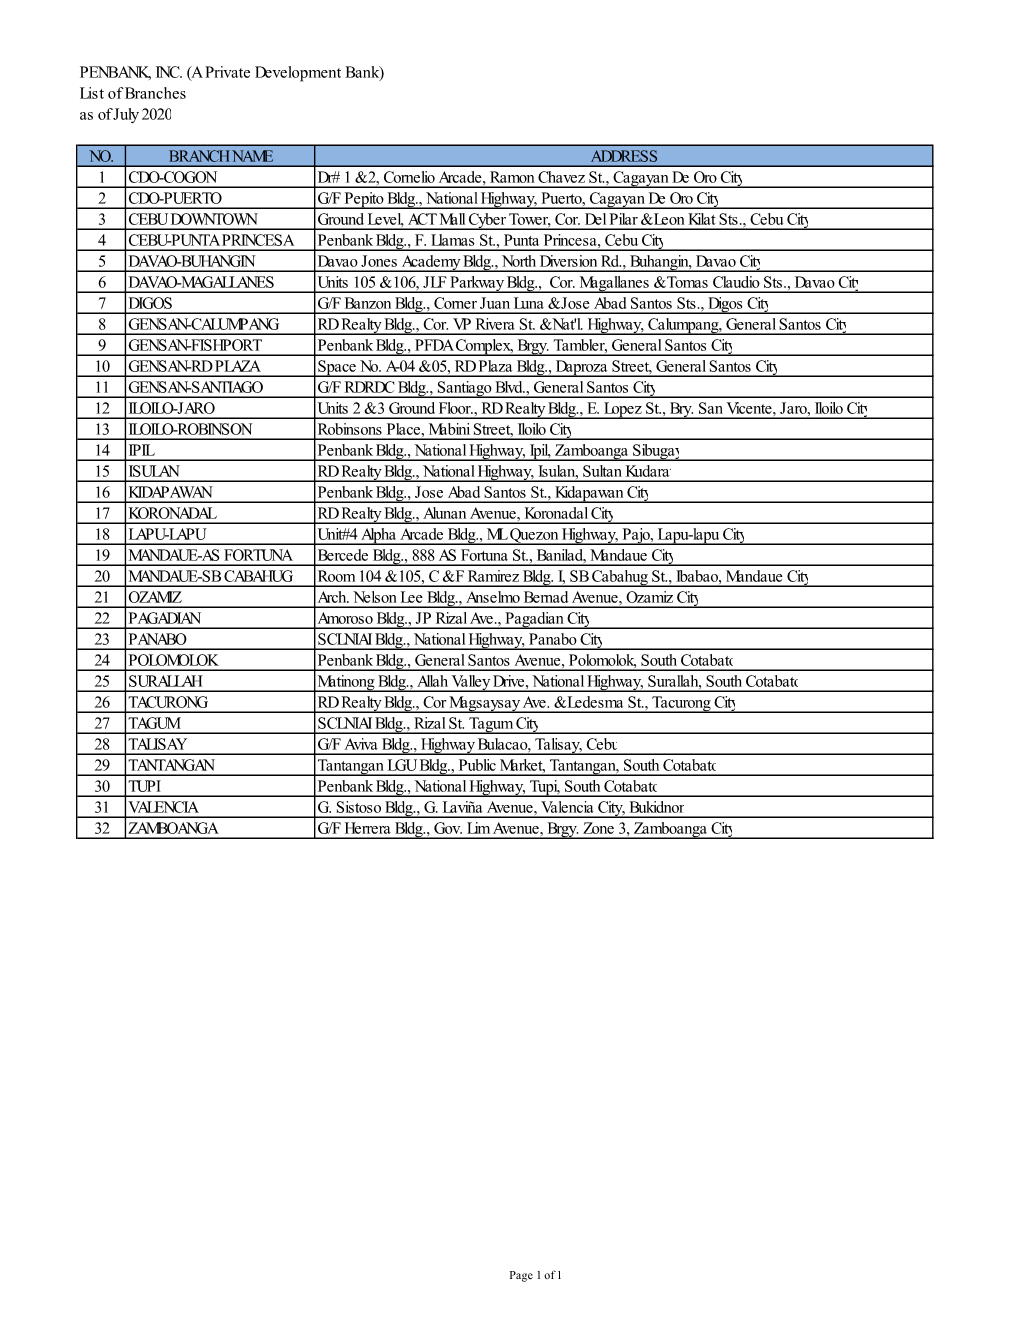 PENBANK, INC. (A Private Development Bank) List of Branches As of July 2020